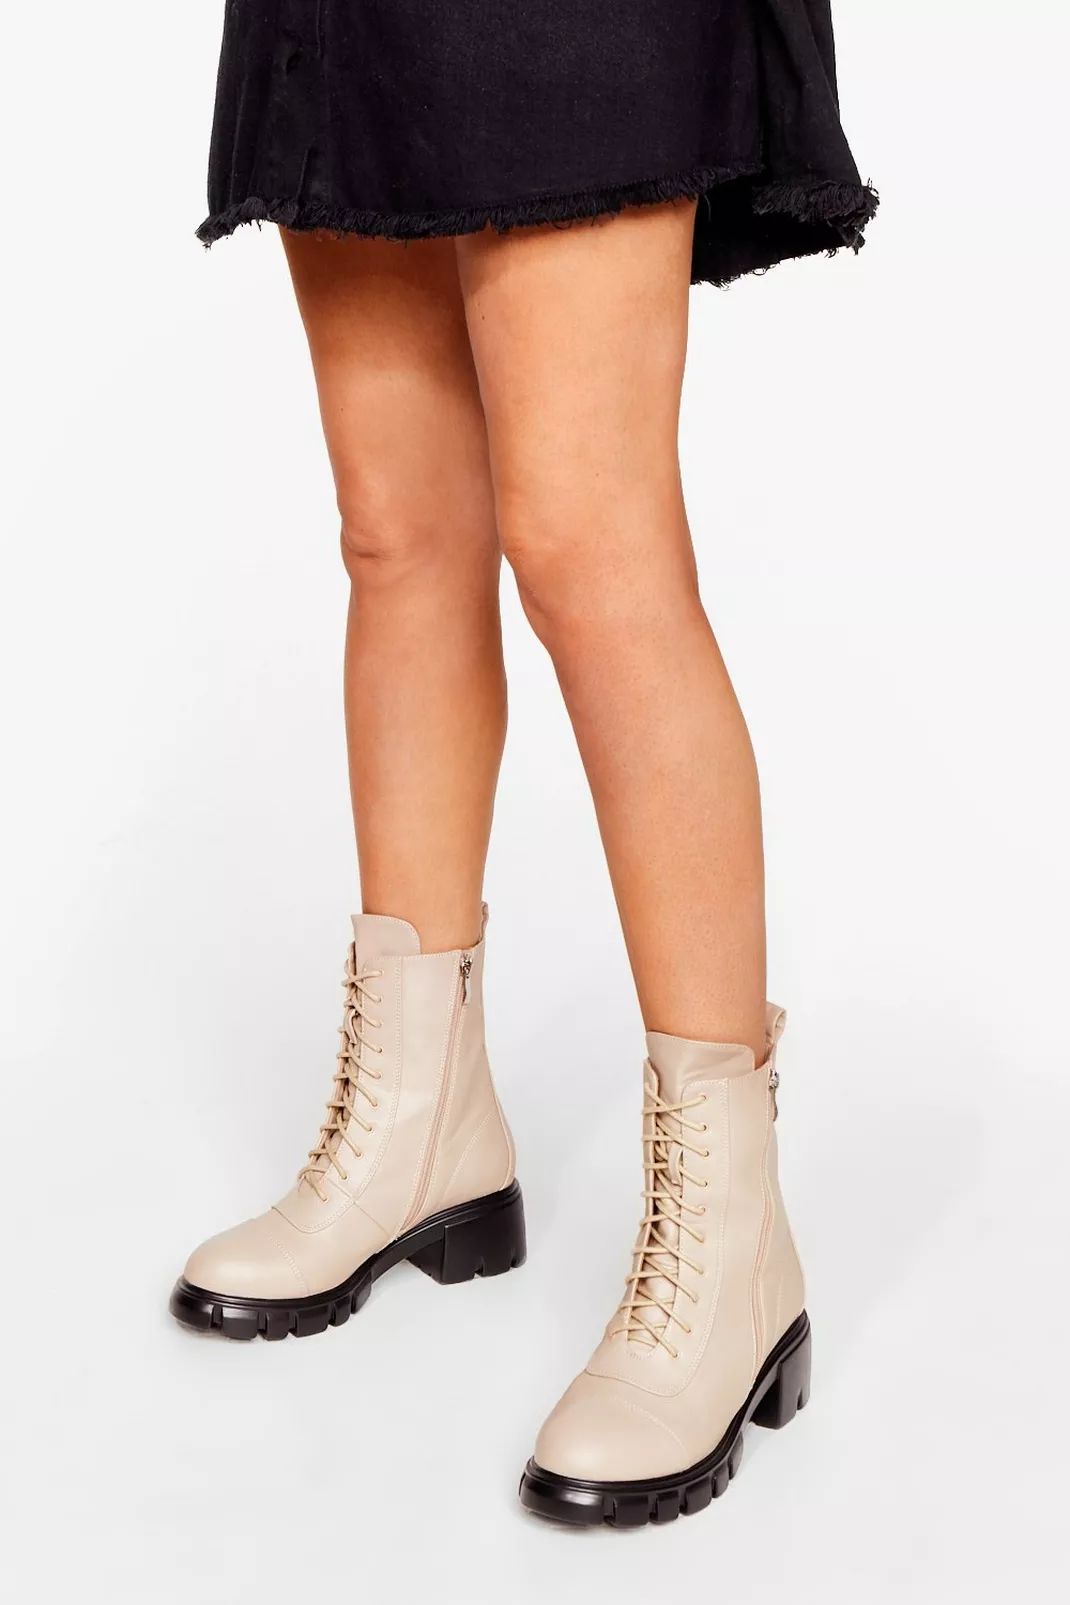 Zip the Small Talk Lace-Up Biker Boots | Nasty Gal (US)